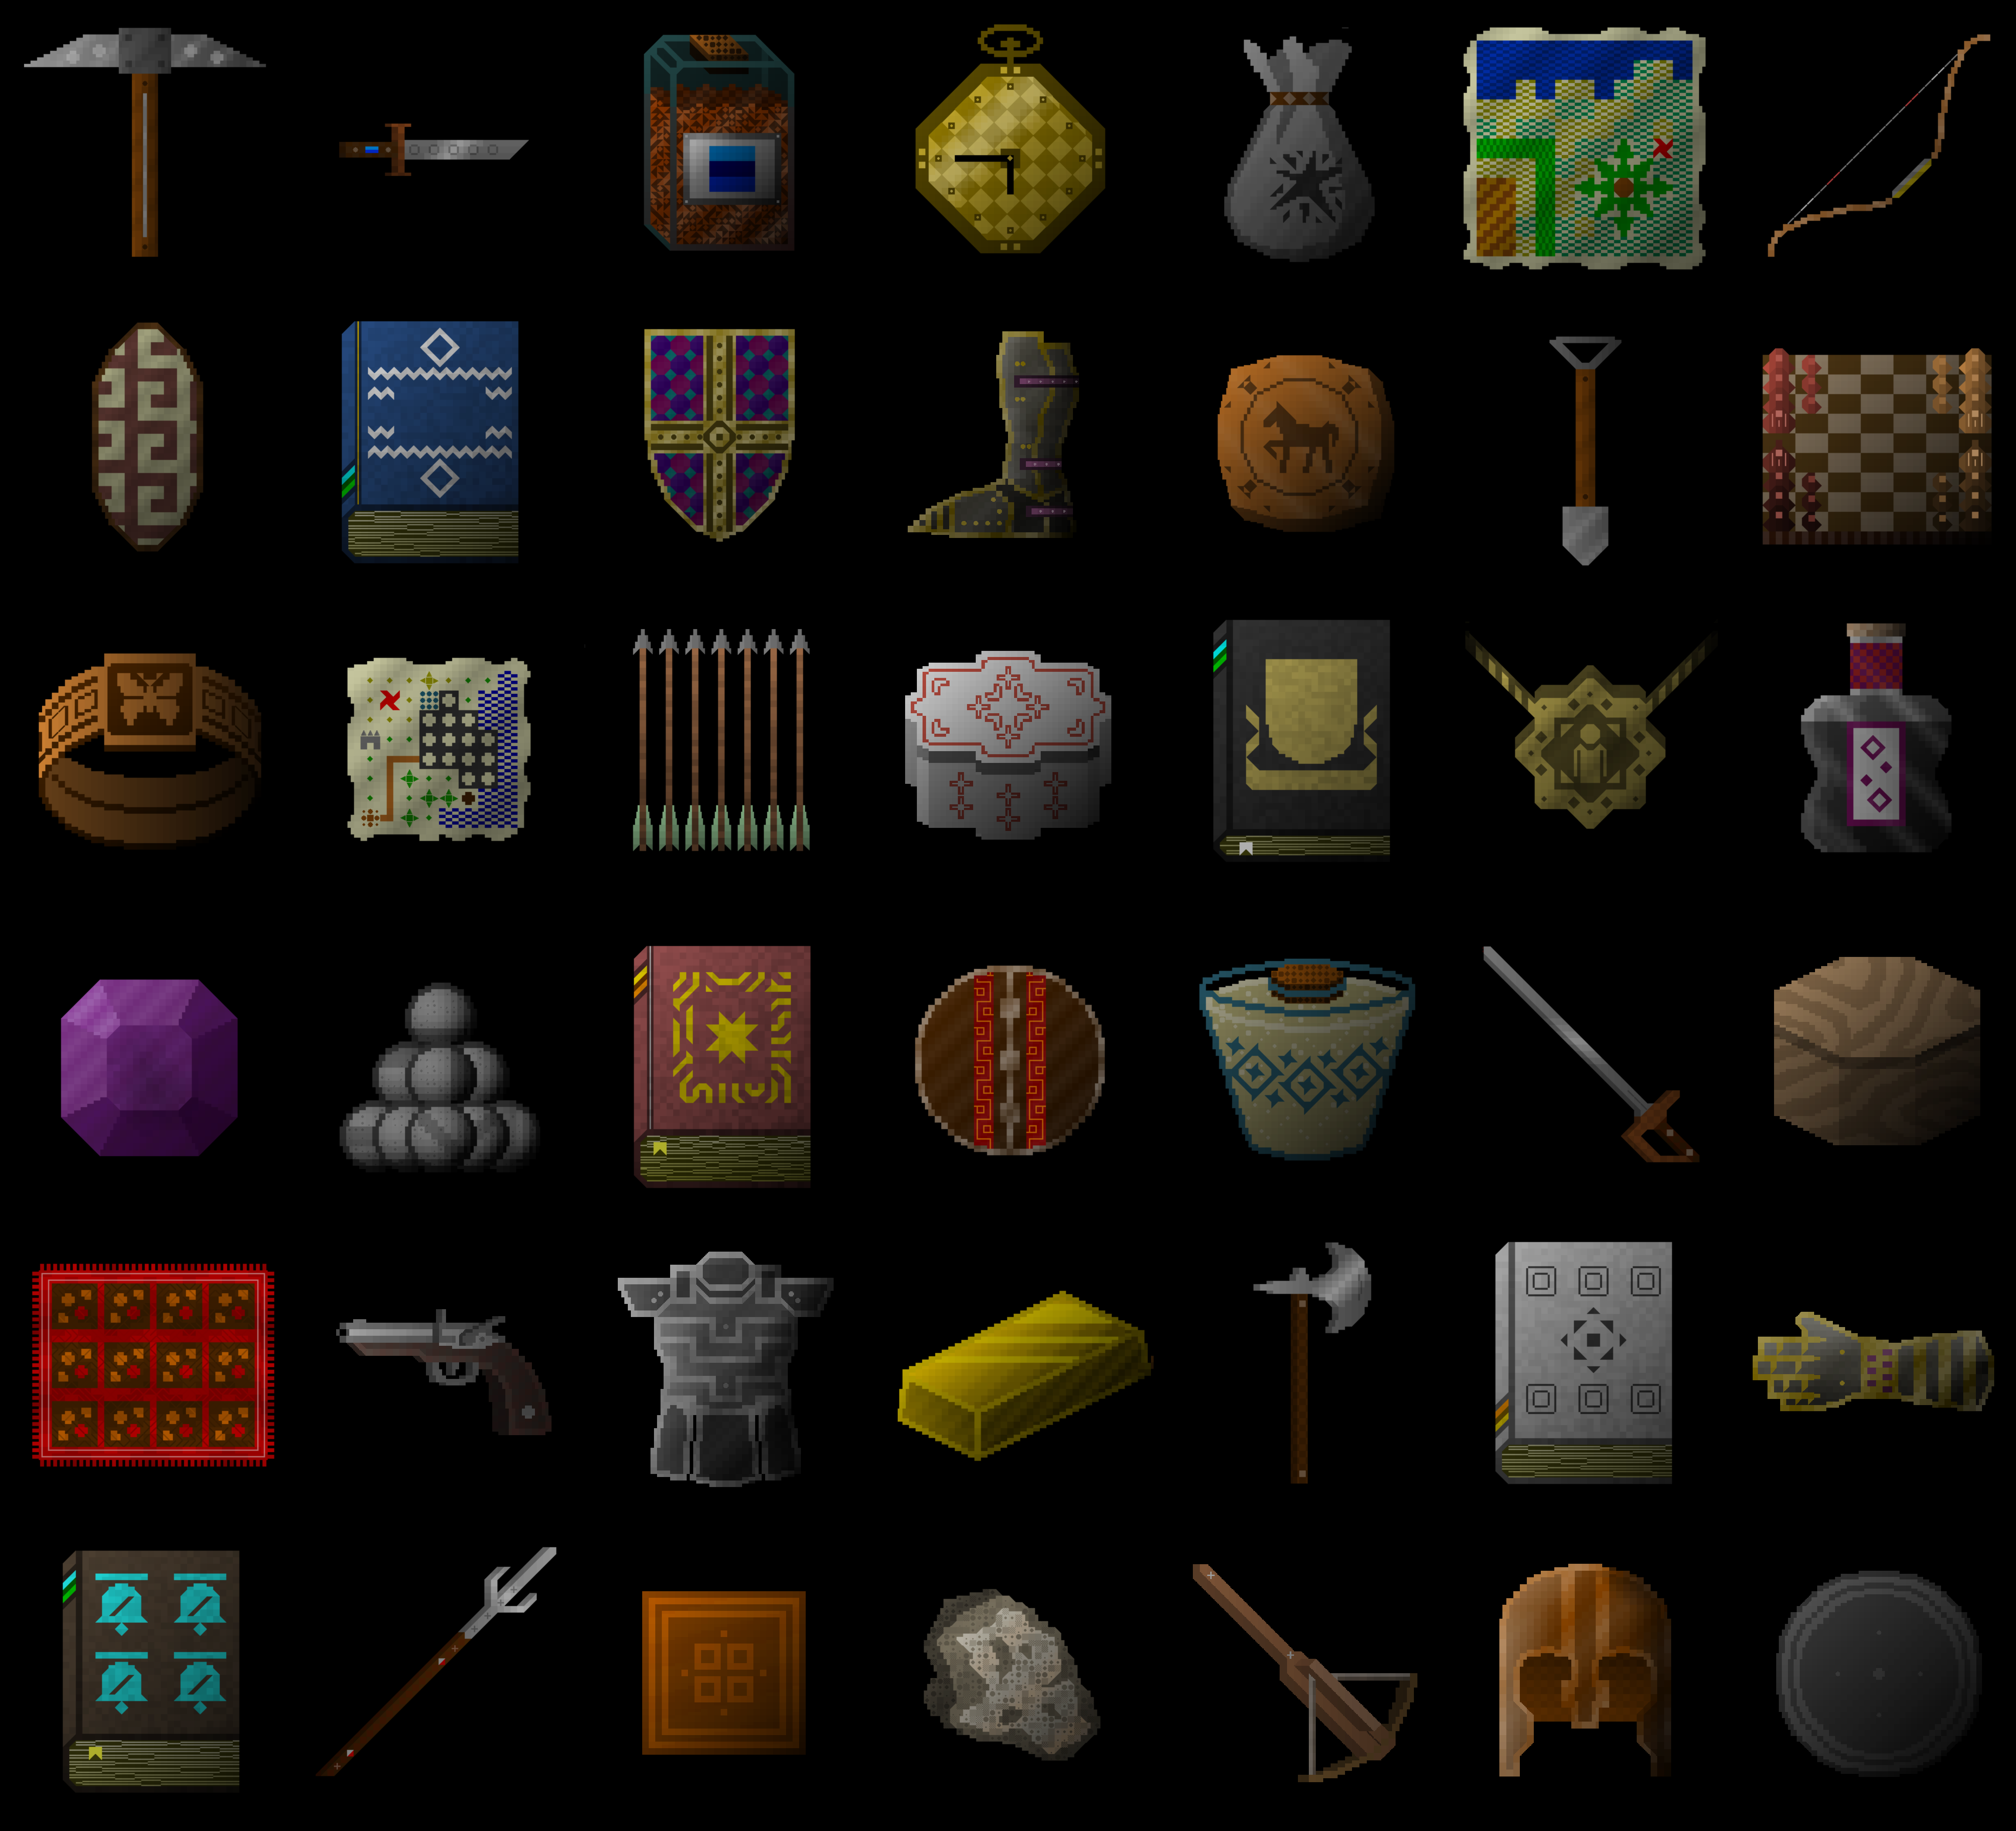 History generation in game. Ultima ratio Regum Roguelike. Ultima ratio Regum. Ultima ratio бусина. Sale of game items.